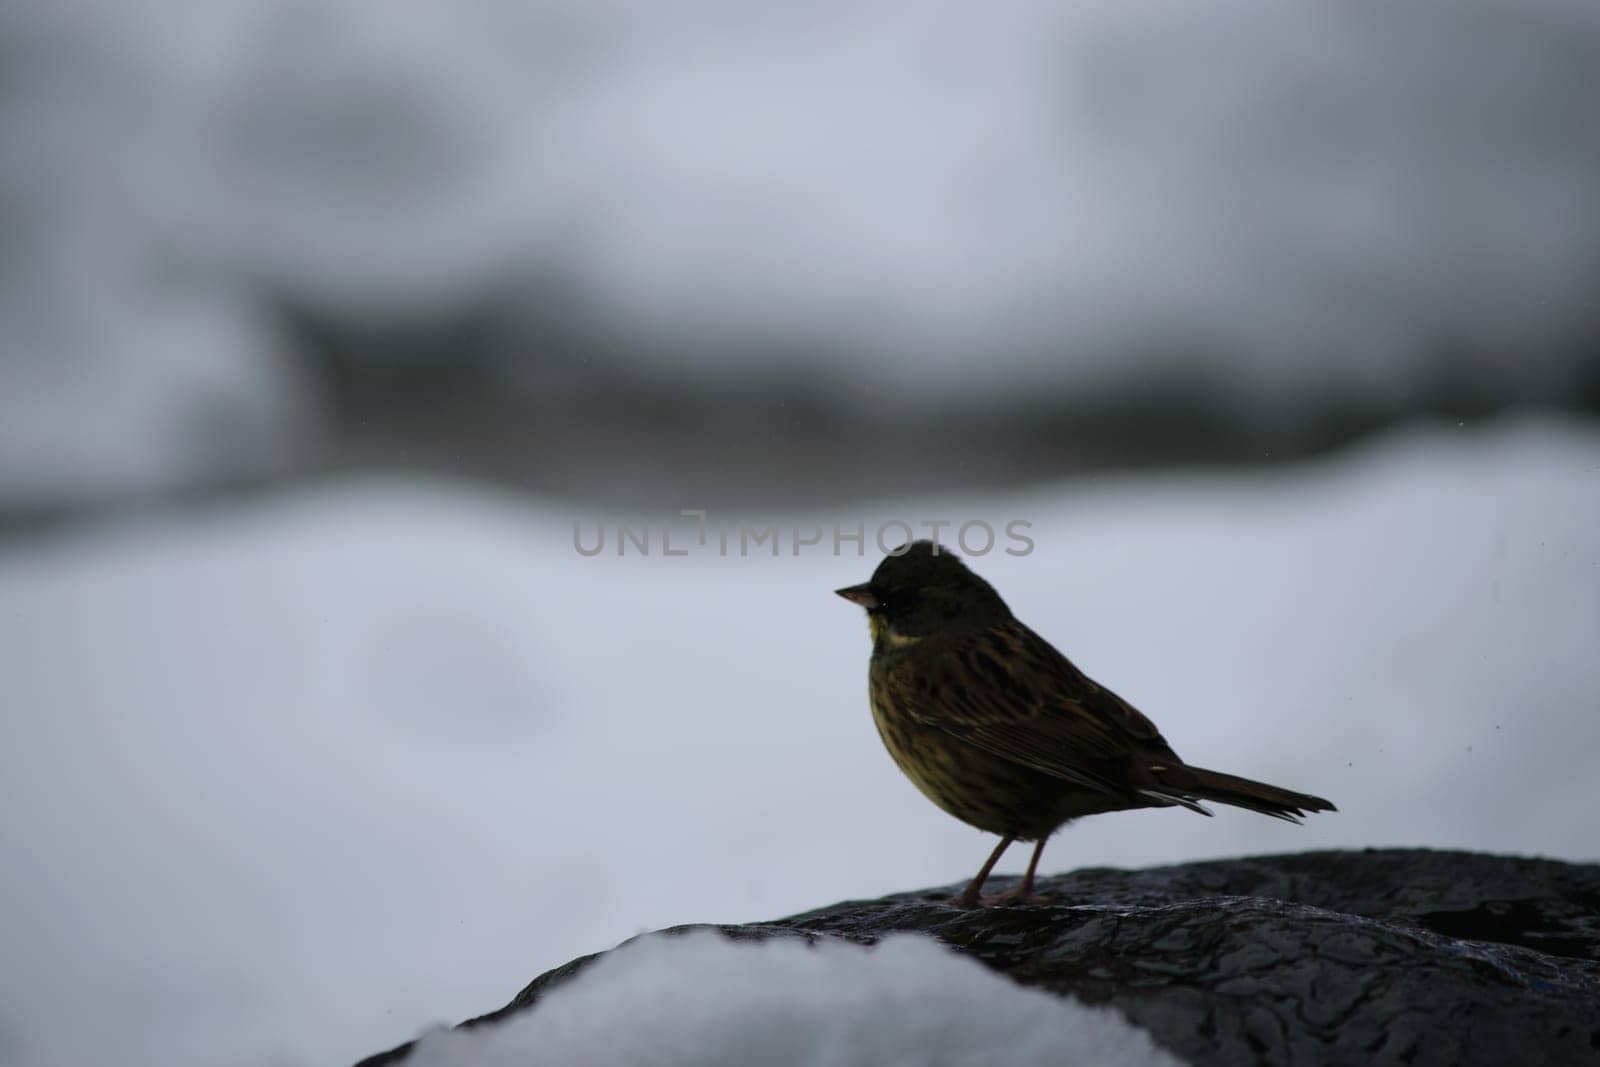 Silhouette of a bird in the snow by jameshumble